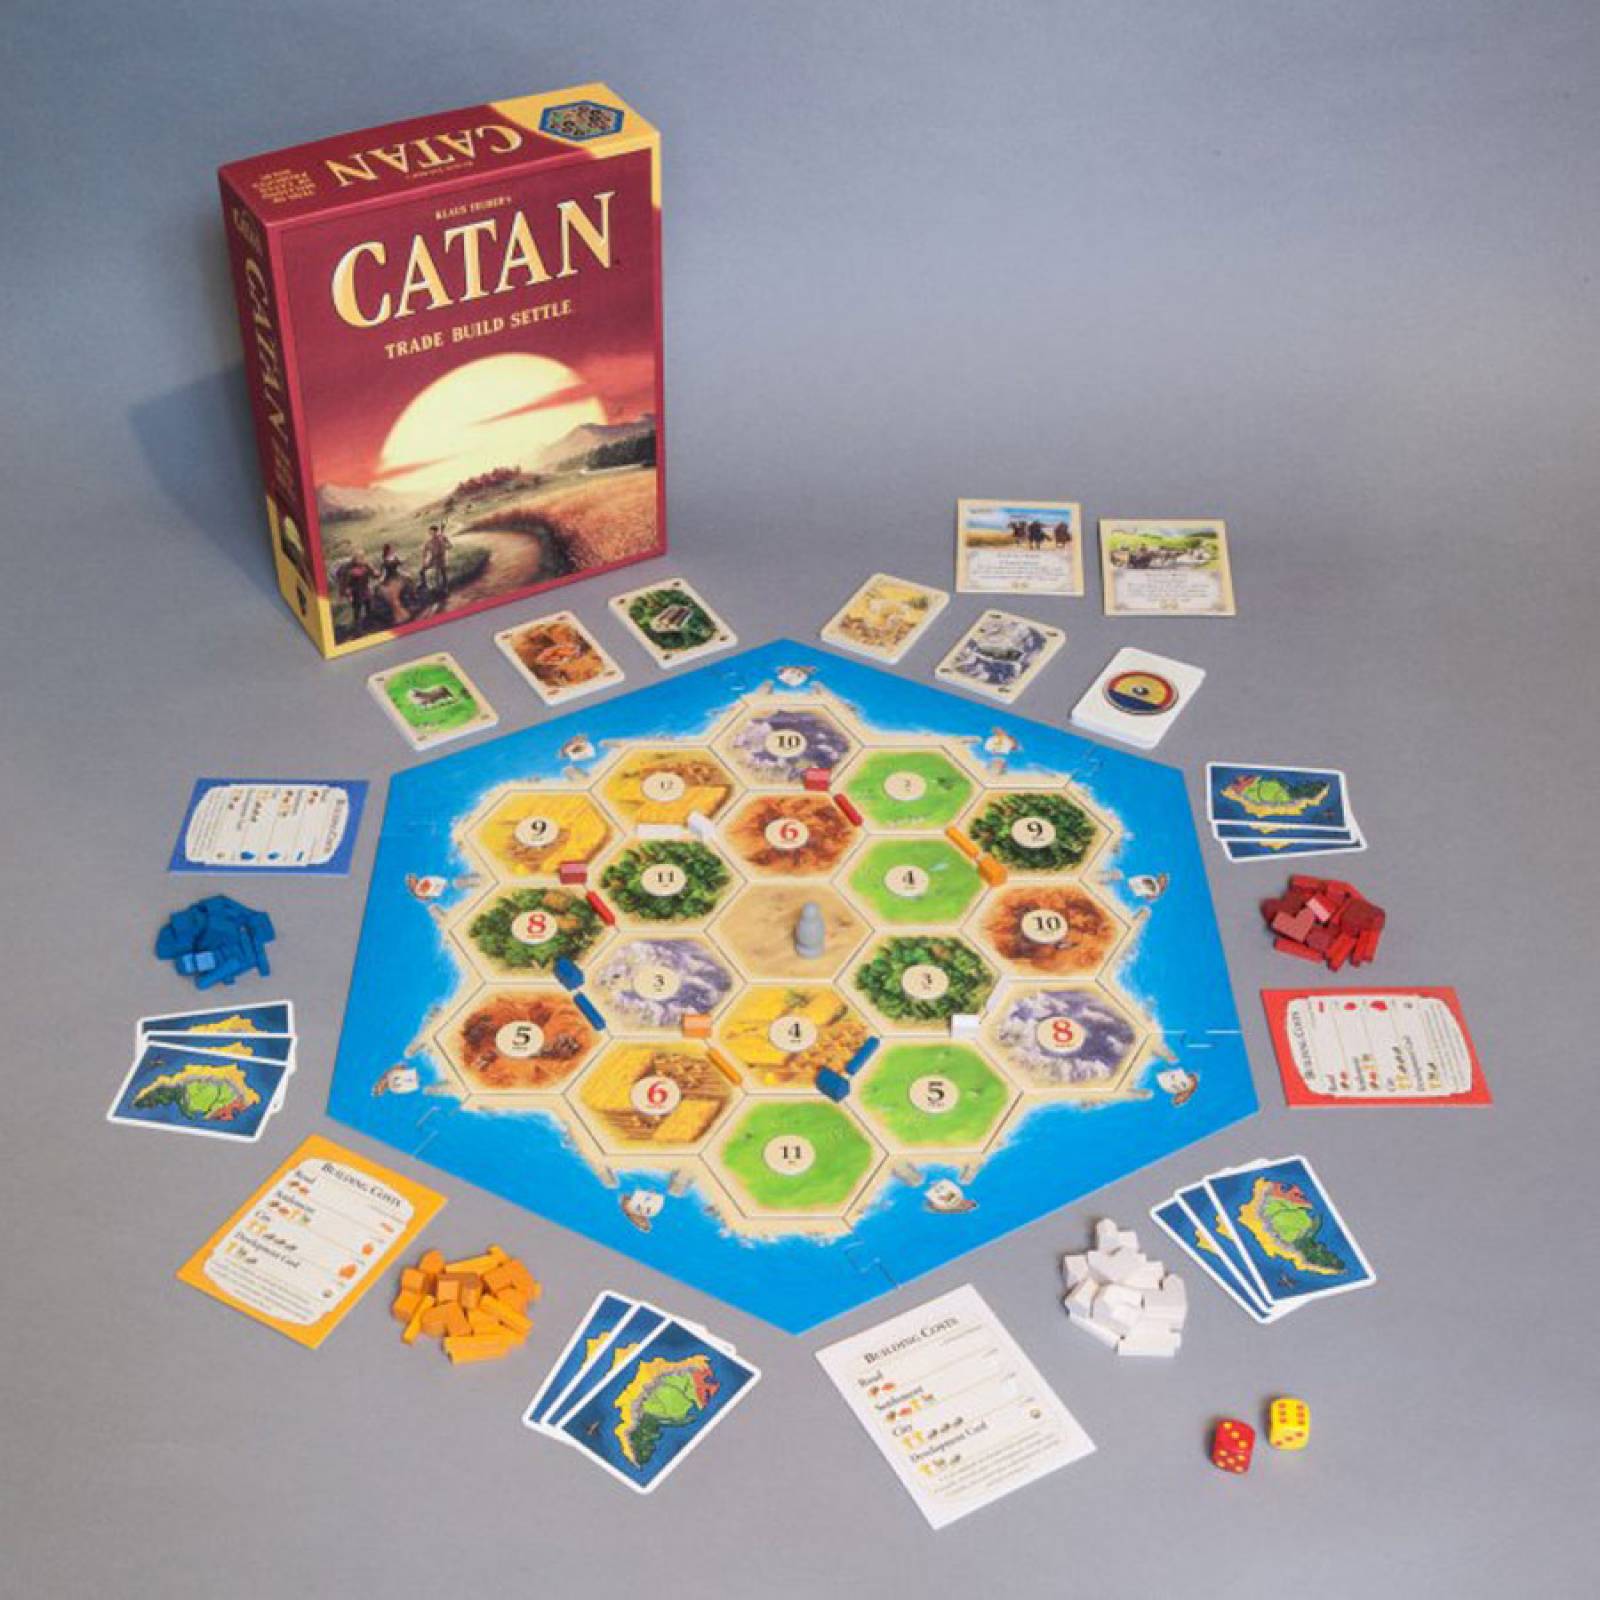 Catan Game - Trade Build Settle 10+ by Klaus Tuber thumbnails